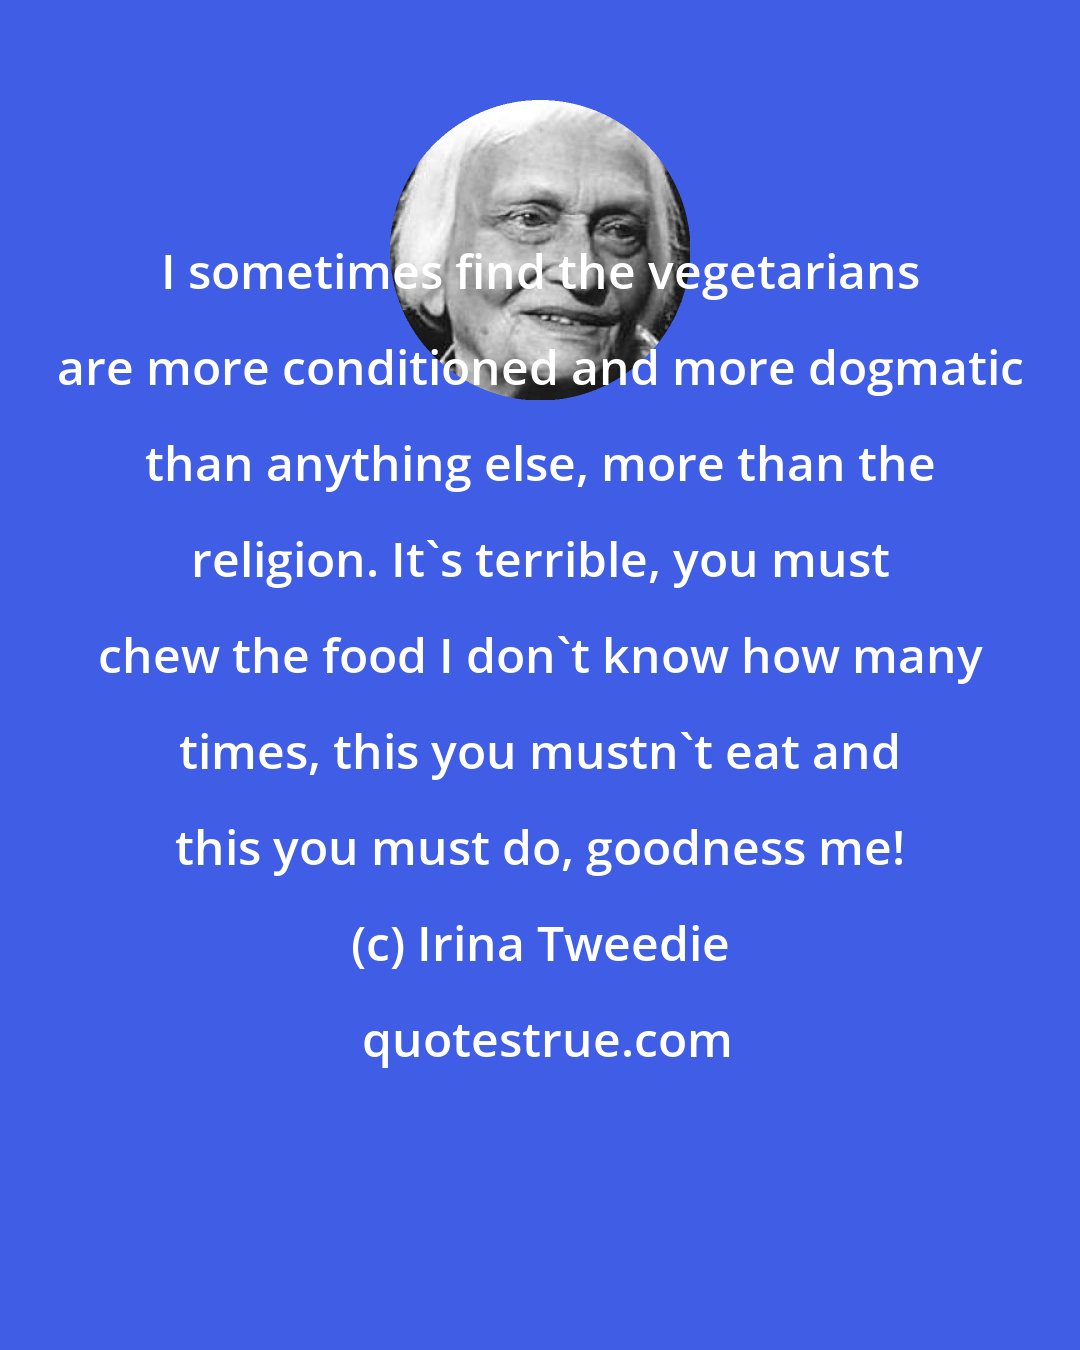 Irina Tweedie: I sometimes find the vegetarians are more conditioned and more dogmatic than anything else, more than the religion. It's terrible, you must chew the food I don't know how many times, this you mustn't eat and this you must do, goodness me!